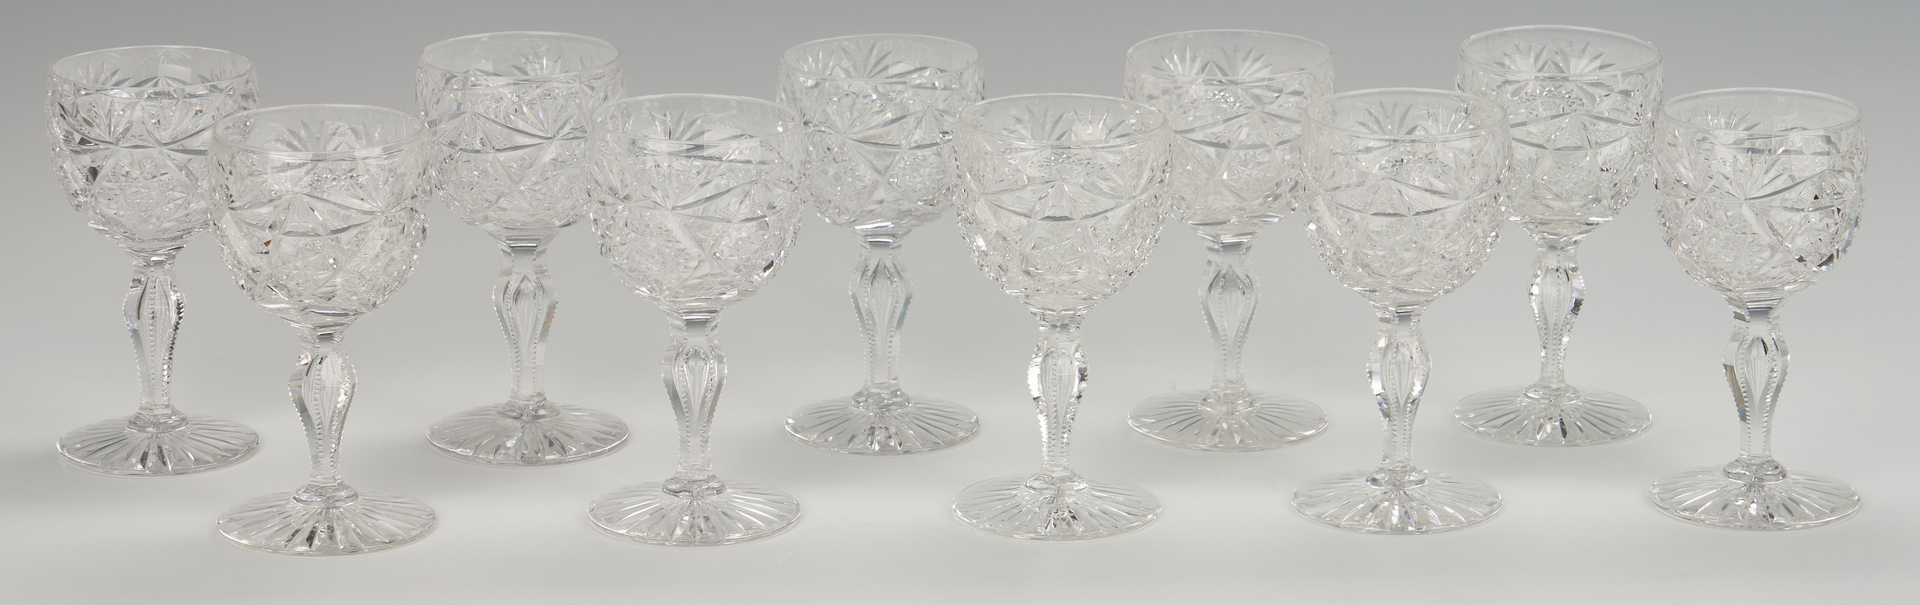 Lot 954: 16 ABPCG Goblets including signed Libbey